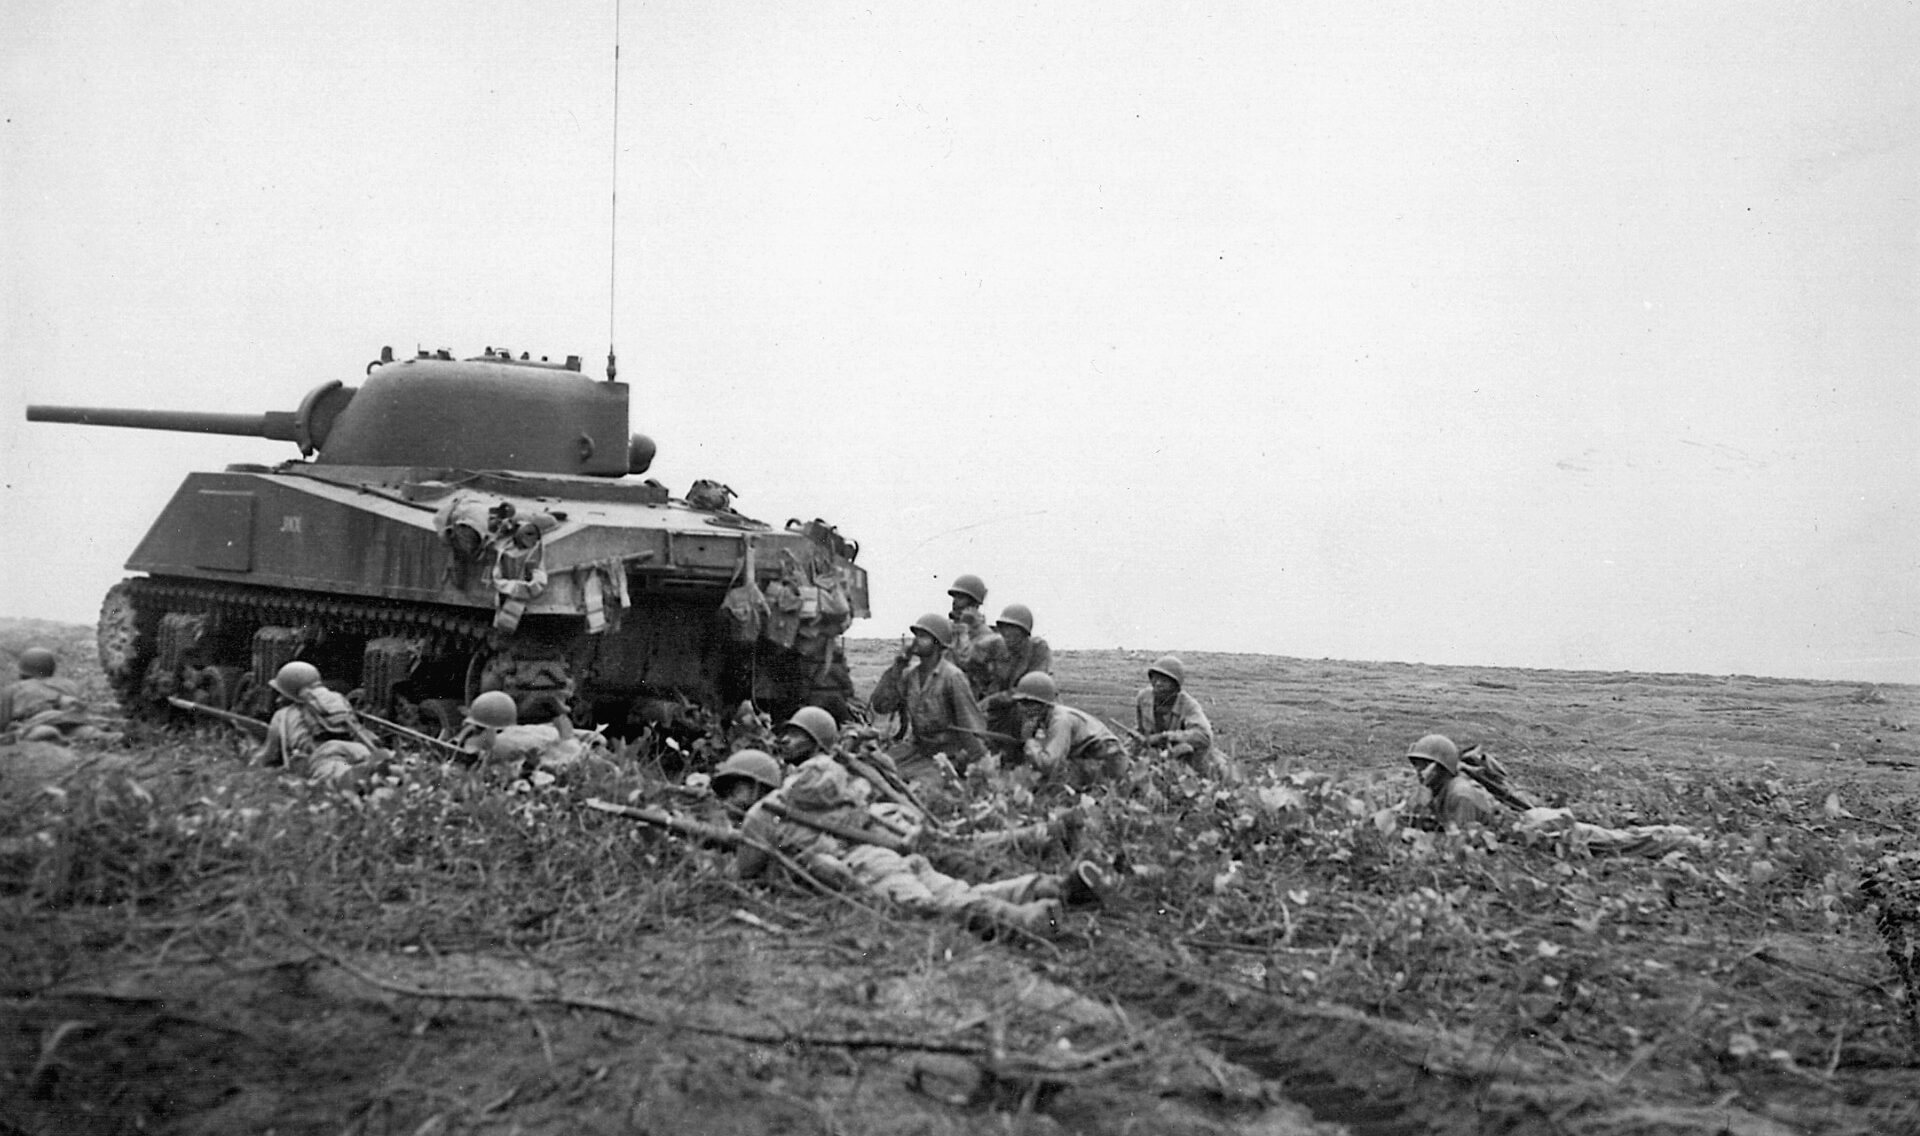 Troops of the 24th Infantry, attached to the 23rd (Americal) Division, gather behind a Sherman tank before assaulting enemy positions near Empress Augusta Bay, Bougainville, 1944. By war’s end, the 93rd reached Mindanao and Leyte in the Philippines and proved that black soldiers were every bit as brave as their white counterparts.